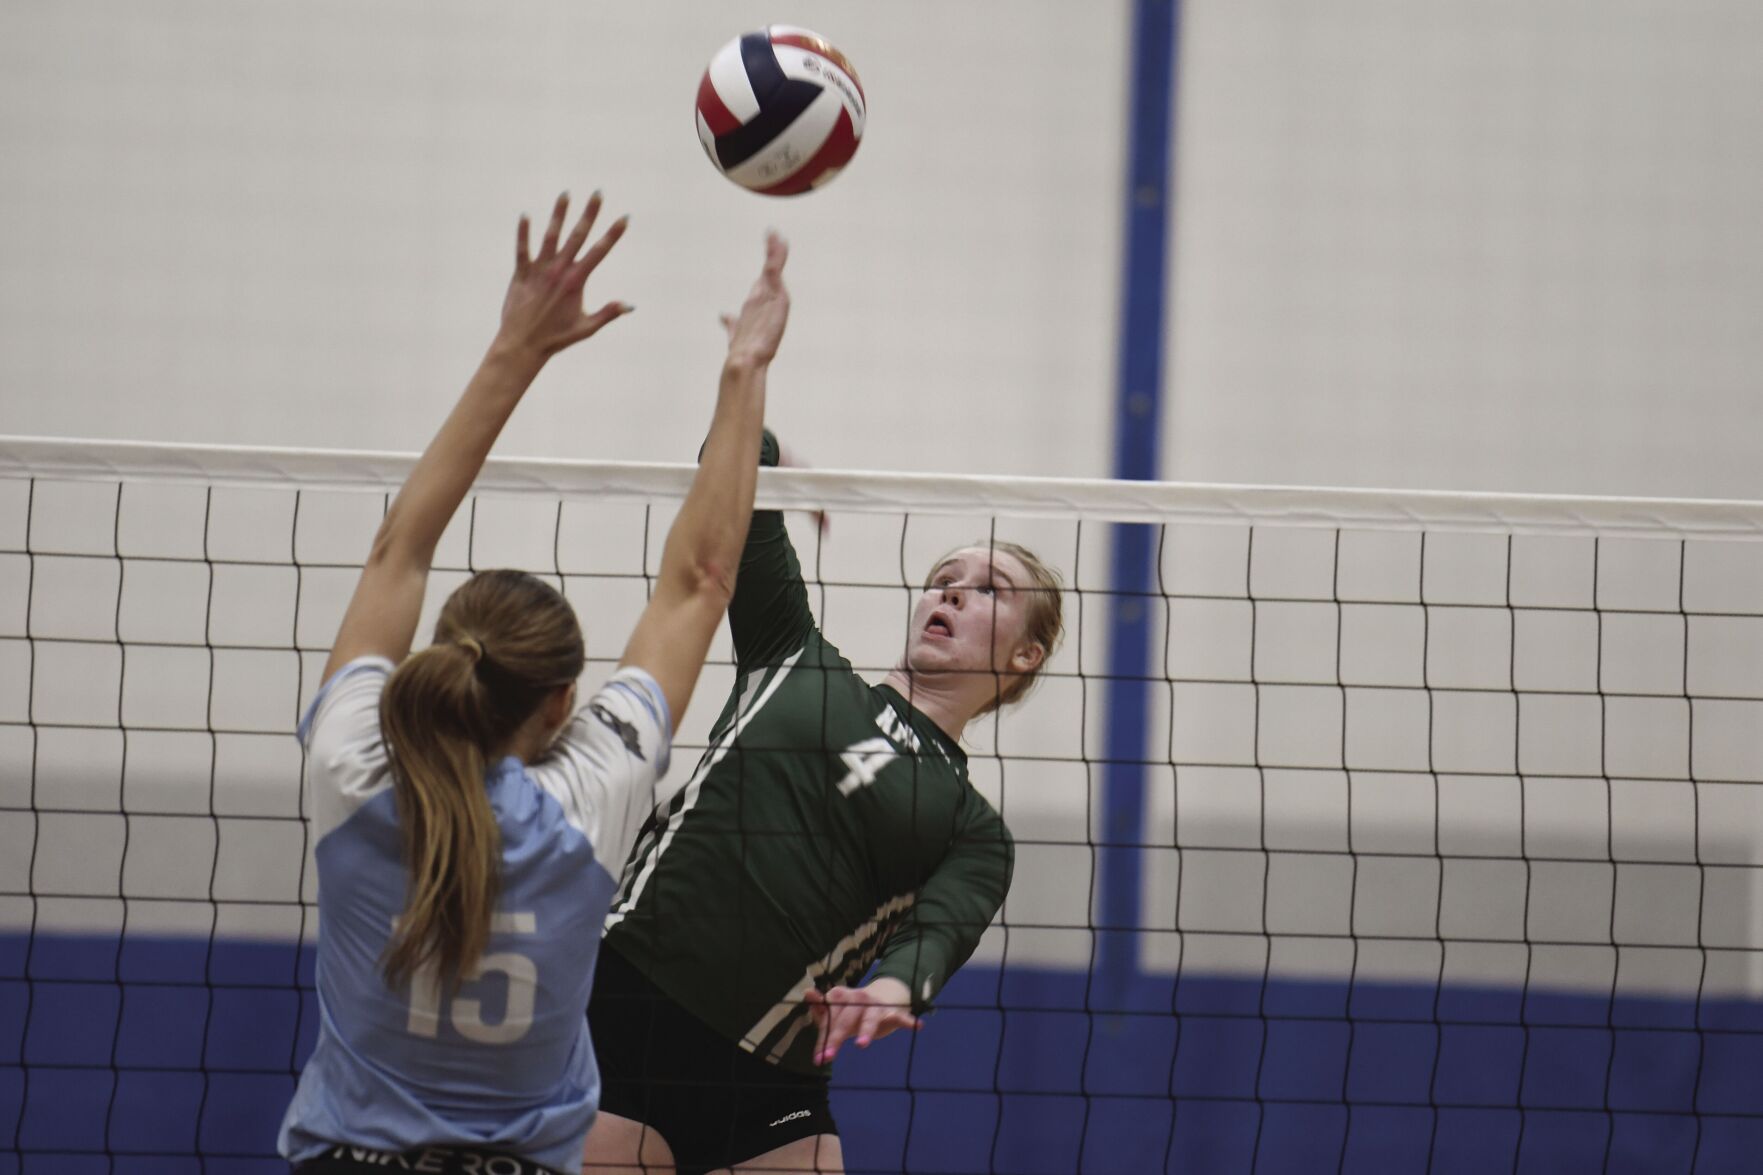 Xavier’s Dominant Serve Leads to Victory in Sectional Final